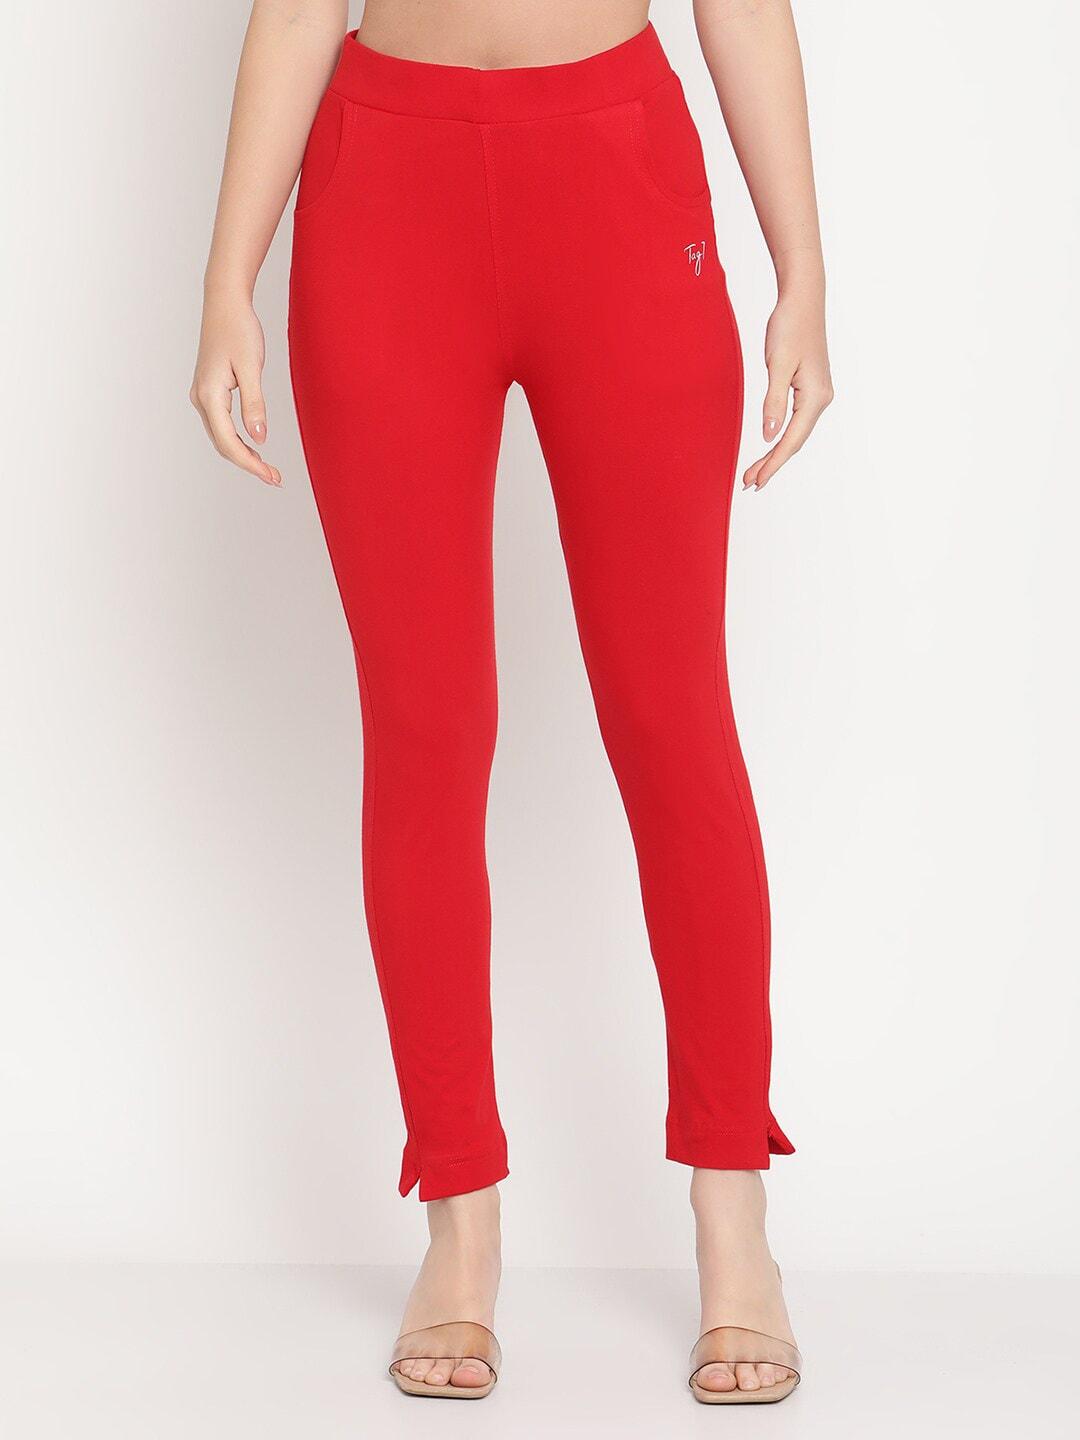 TAG 7 Women Red Solid Ankle-Length Jeggings